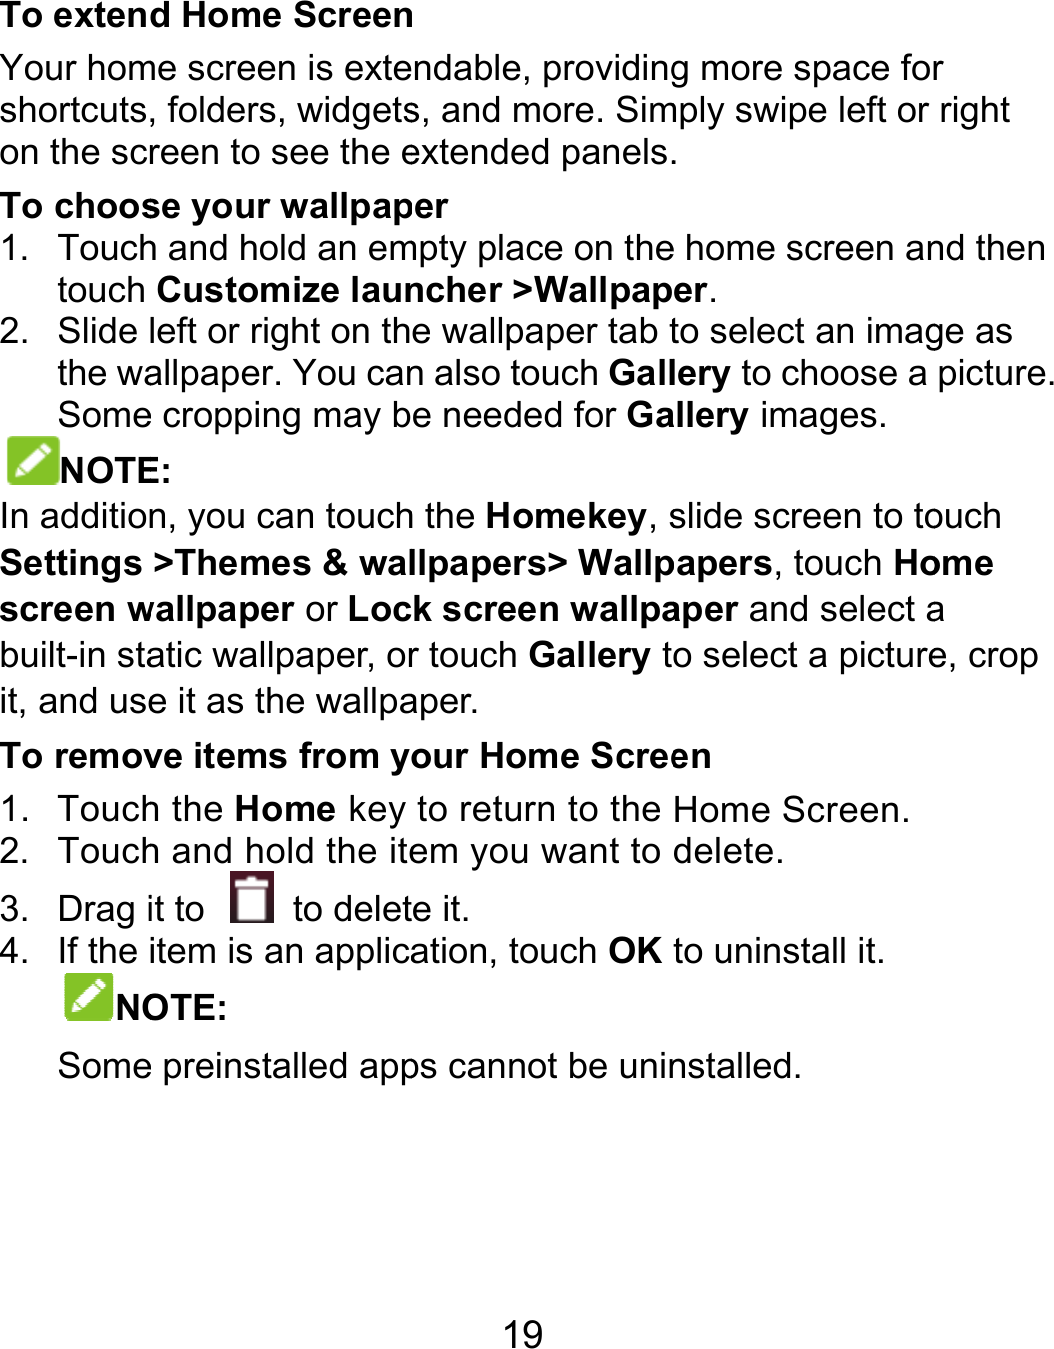  To extenYour homshortcutson the scrTo choos1. Touchtouch 2. Slide the waSomeNOTEIn additionSettings screen wbuilt-in stait, and useTo remov1. Touch2. Touch3. Drag i4. If the NOSome   d Home Screenme screen is exte, folders, widgetsreen to see the ese your wallpaph and hold an emCustomize launleft or right on thallpaper. You cane cropping may bE: n, you can touch&gt;Themes &amp; walwallpaper or Locatic wallpaper, ore it as the wallpave items from yh the Home key h and hold the iteit to    to deletitem is an applicaOTE:  e preinstalled app19 n ndable, providings, and more. Simextended panels.per mpty place on thencher &gt;Wallpape wallpaper tab tn also touch Galle needed for Gah the Homekey, sllpapers&gt; Wallpk screen wallpar touch Gallery taper. our Home Screeto return to the em you want to e it. ation, touch OKps cannot be uning more space formply swipe left or . e home screen aner. to select an imaglery to choose a allery images. slide screen to topapers, touch Hoaper and select ao select a pictureen Home Screen. delete. to uninstall it. nstalled. r right nd then ge as picture. ouch ome a e, crop 